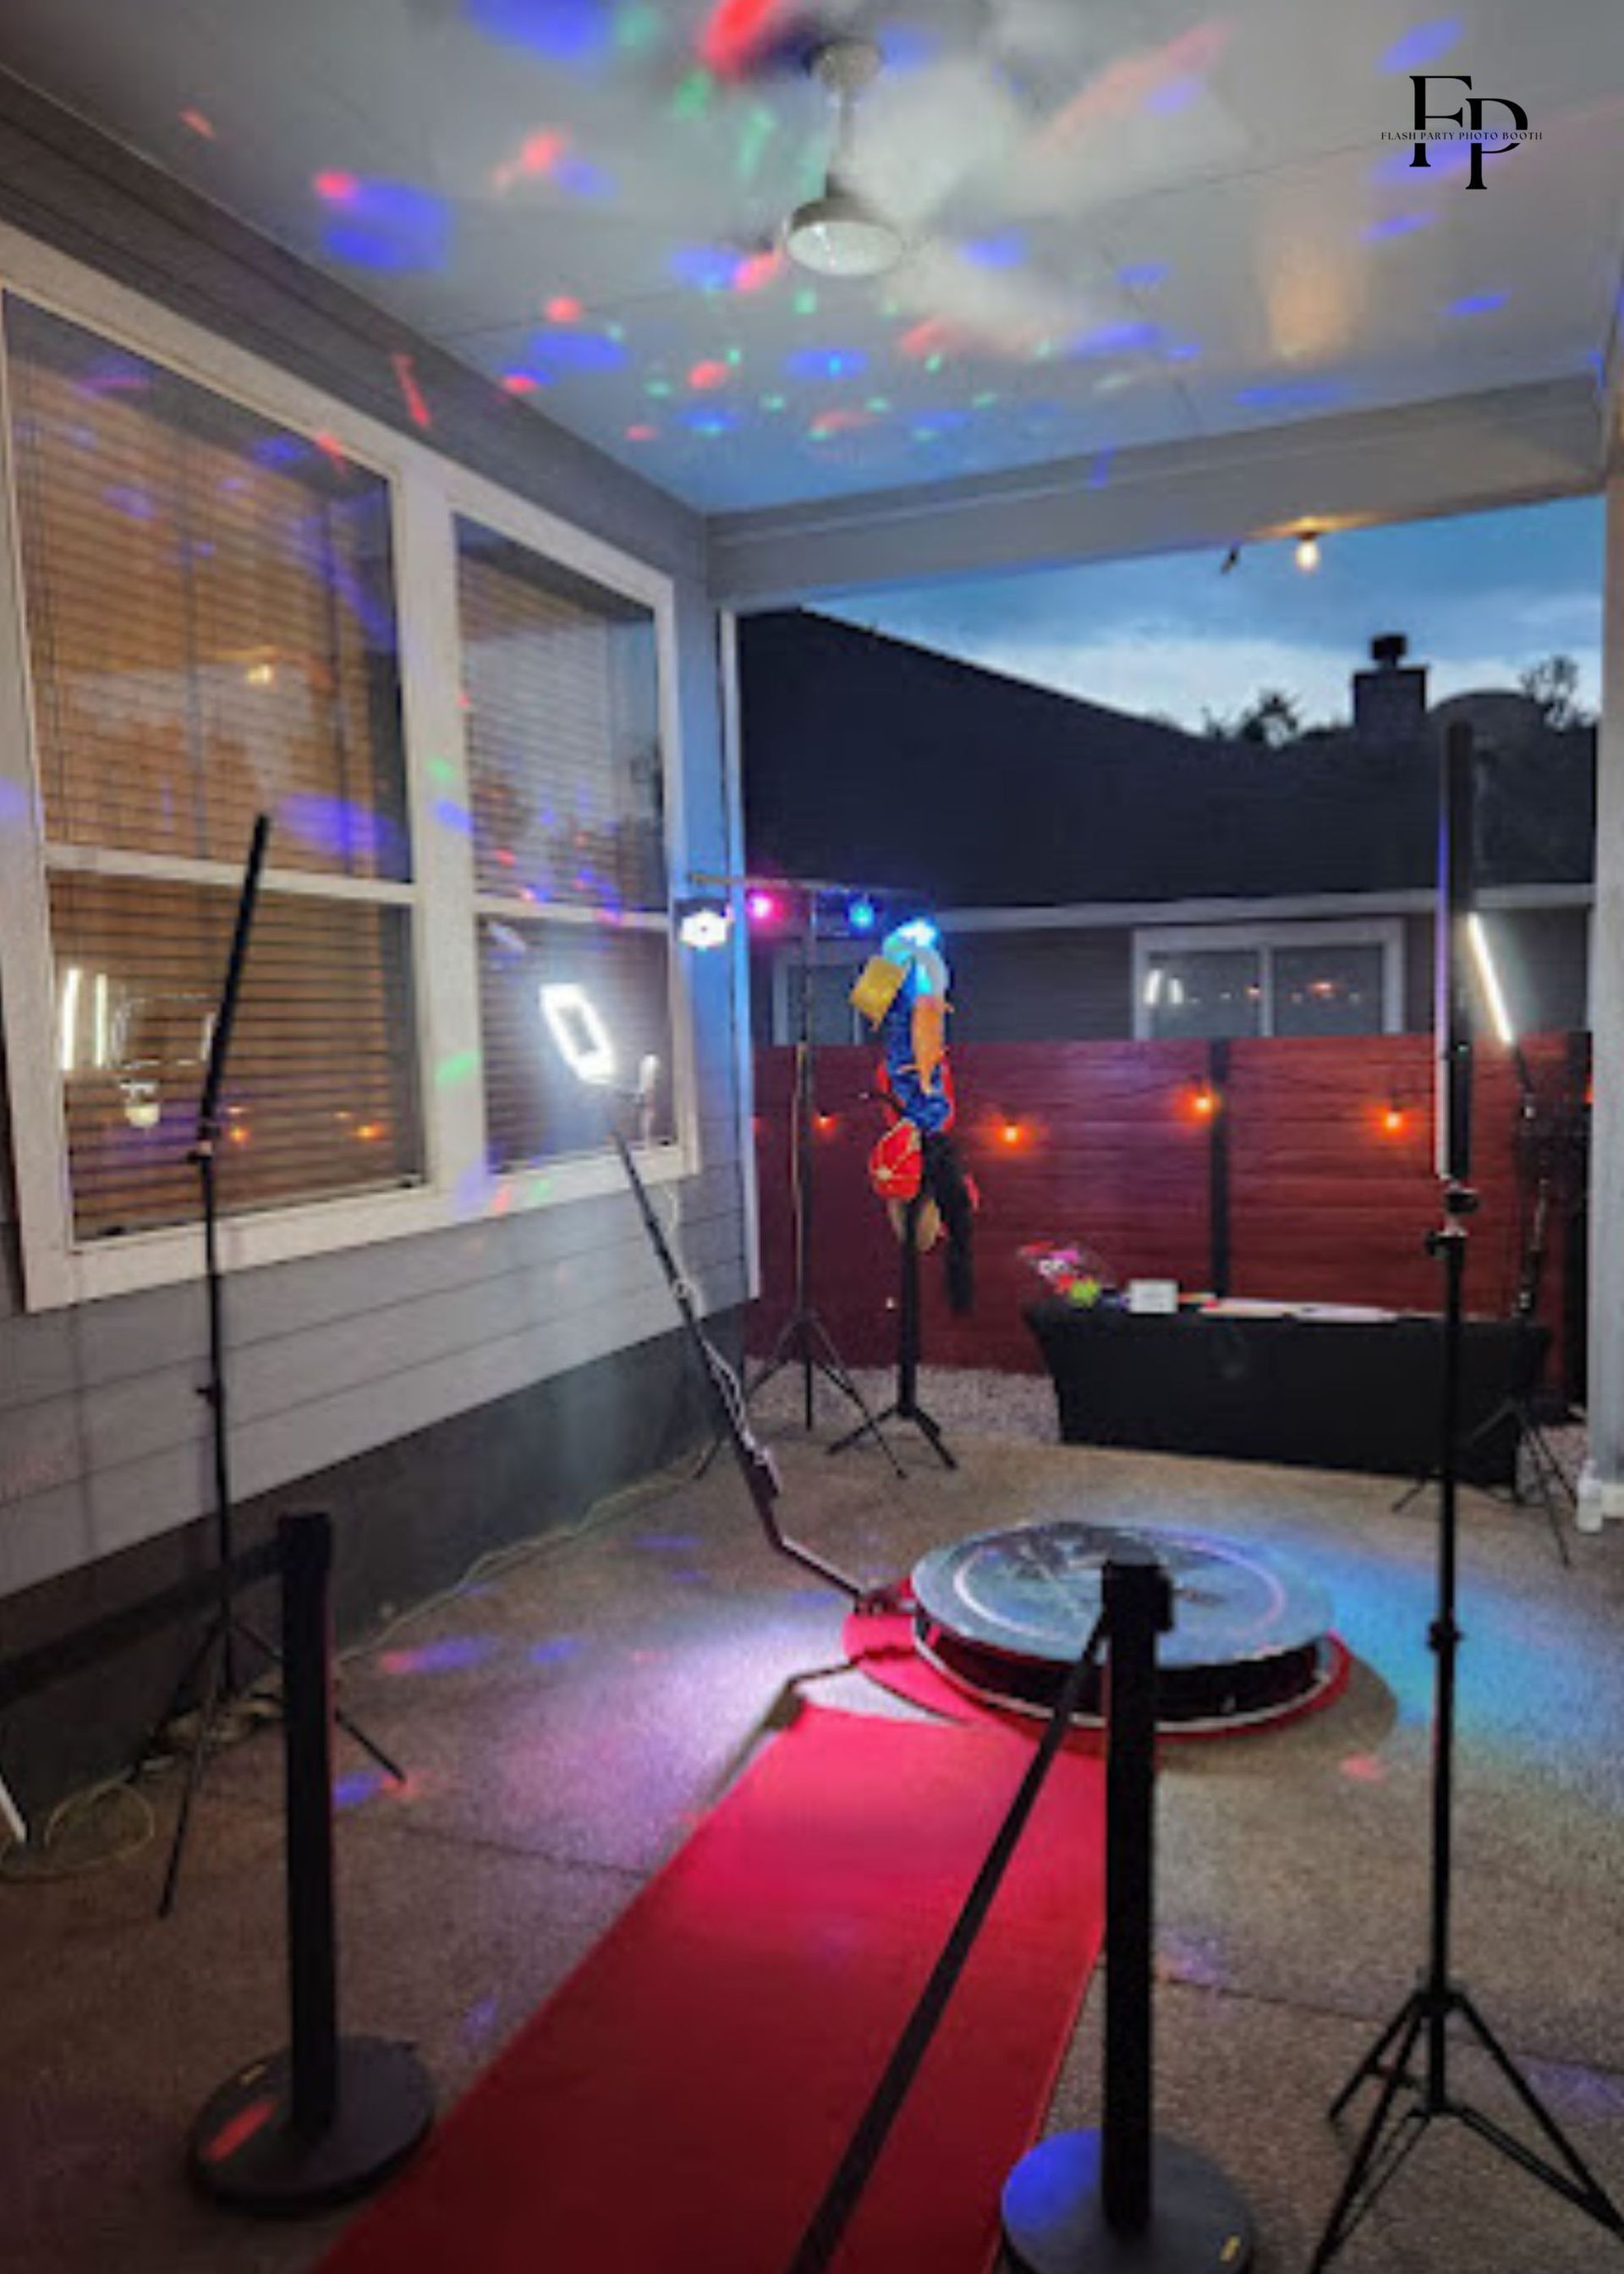 The 360 Photo Booth set up as the centerpiece of a stage.